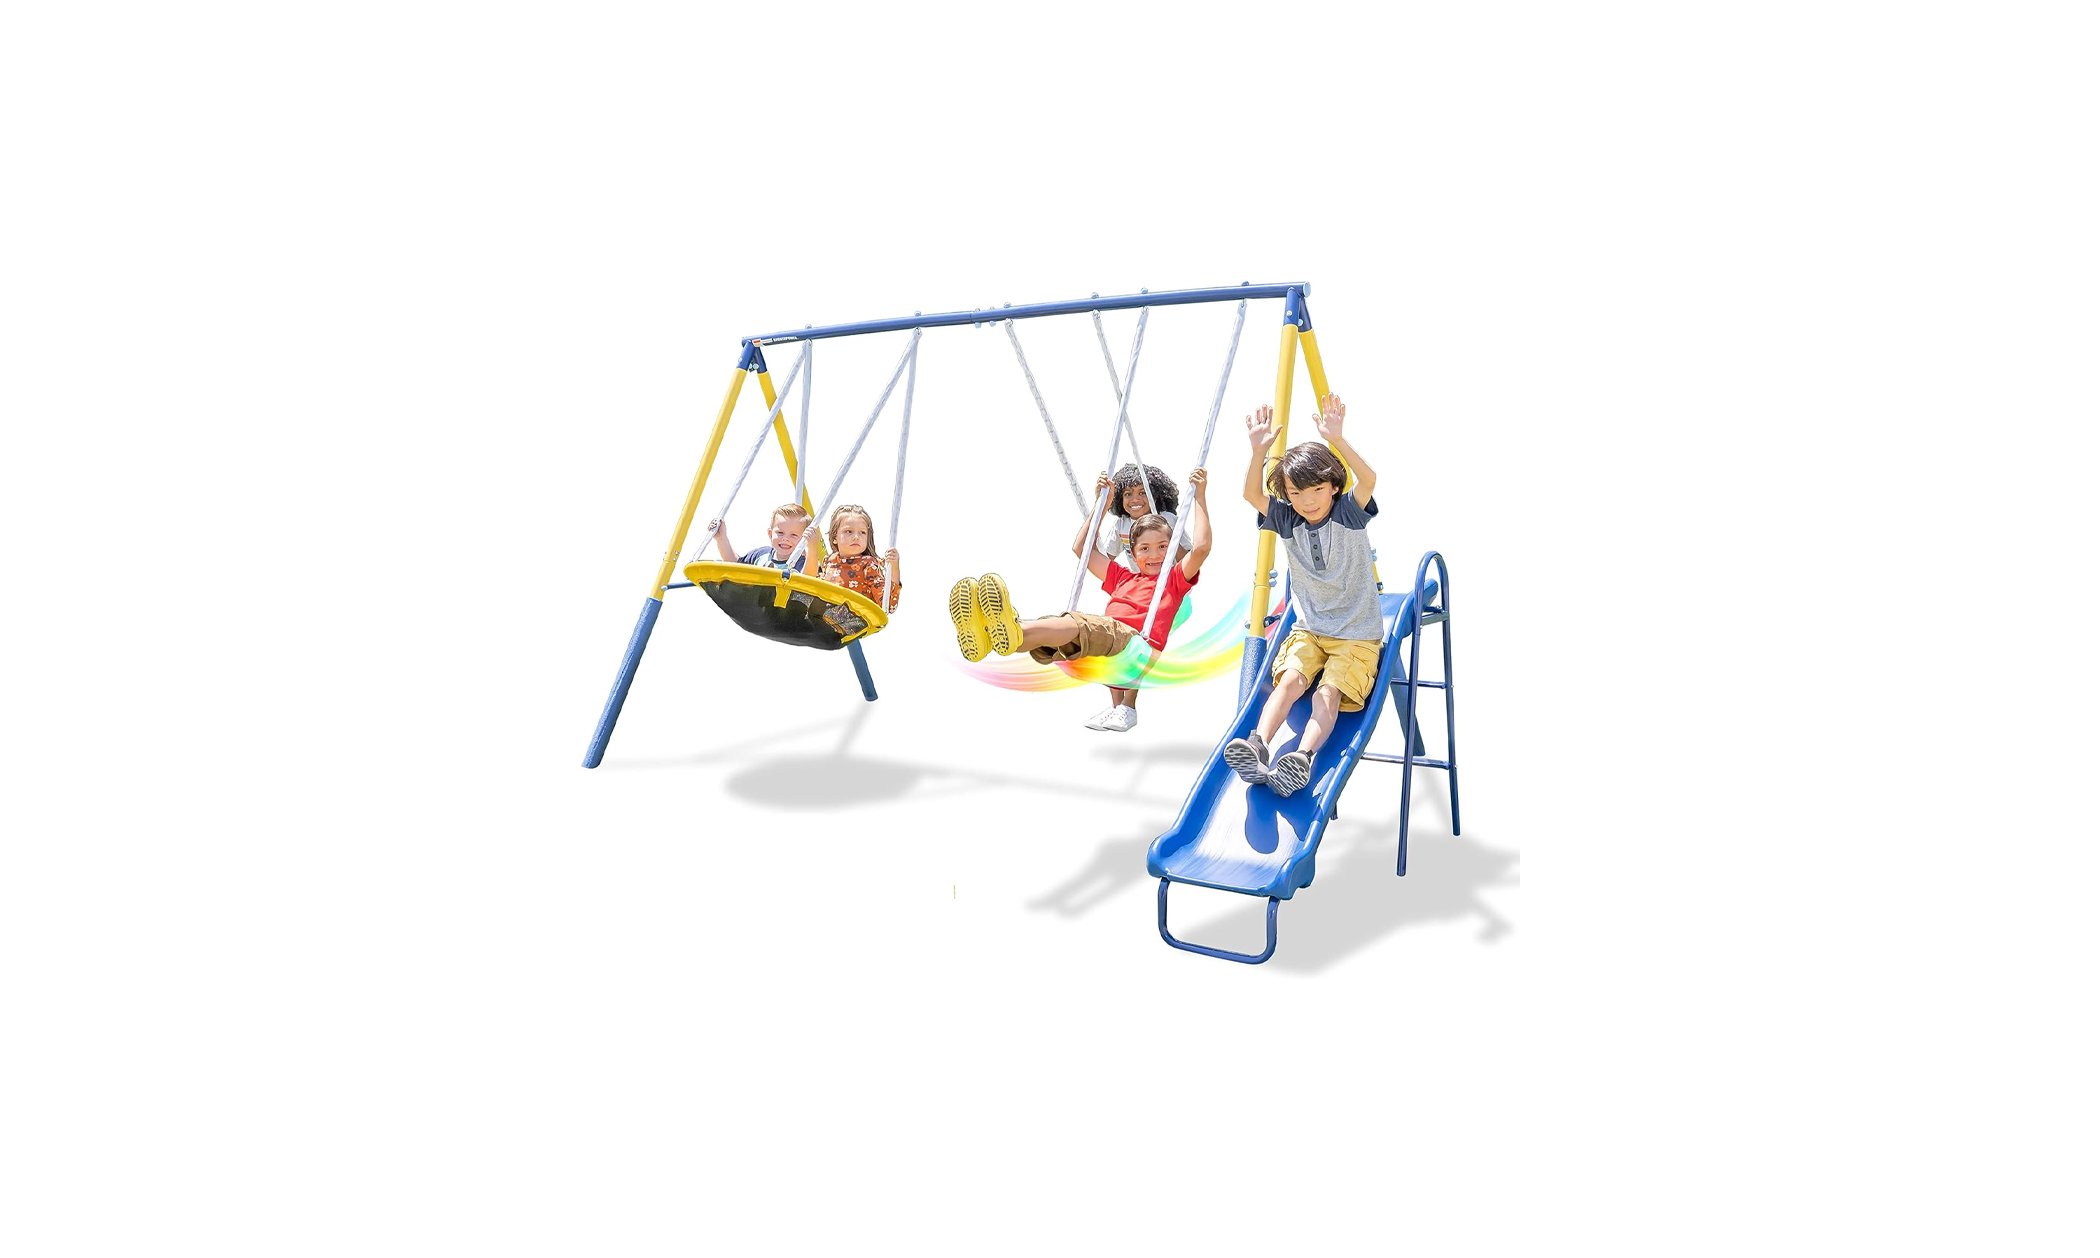 Save 37% on a Starlight Metal Swing Set with LED Swings!